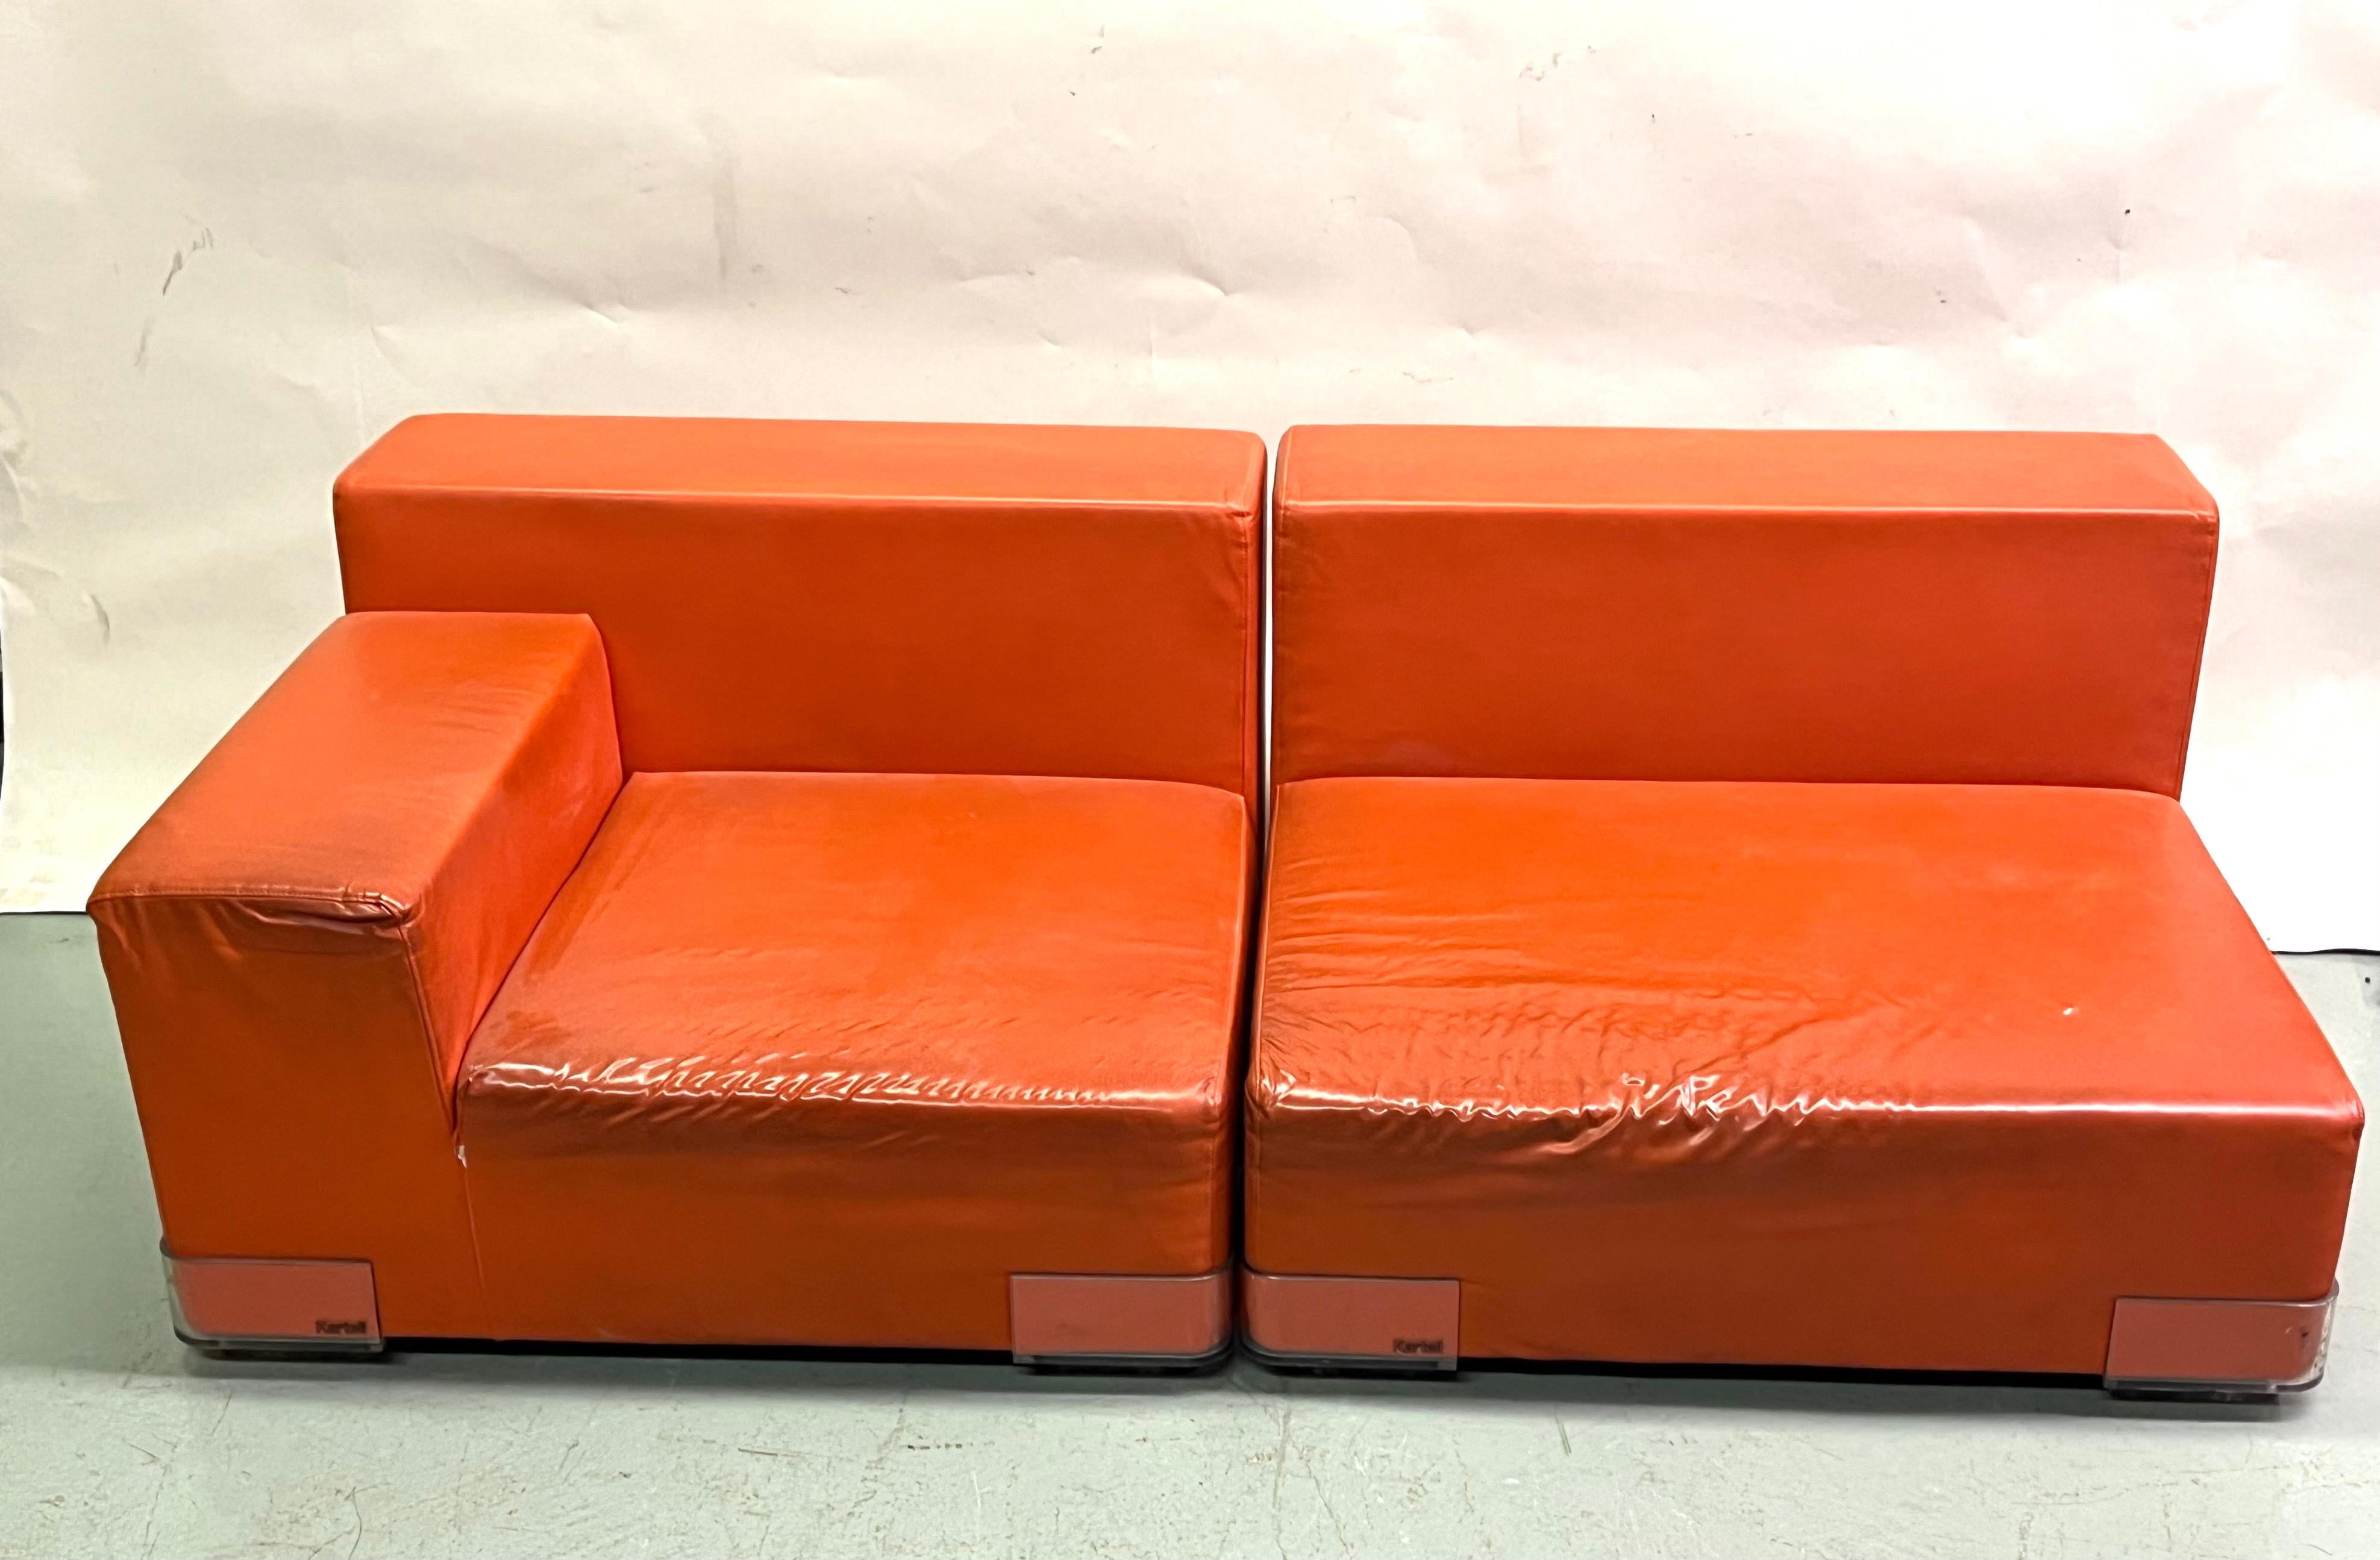 20th Century Italian Mid-Century Modern Pair of Lounge Chairs by Piero Lissoni   For Sale